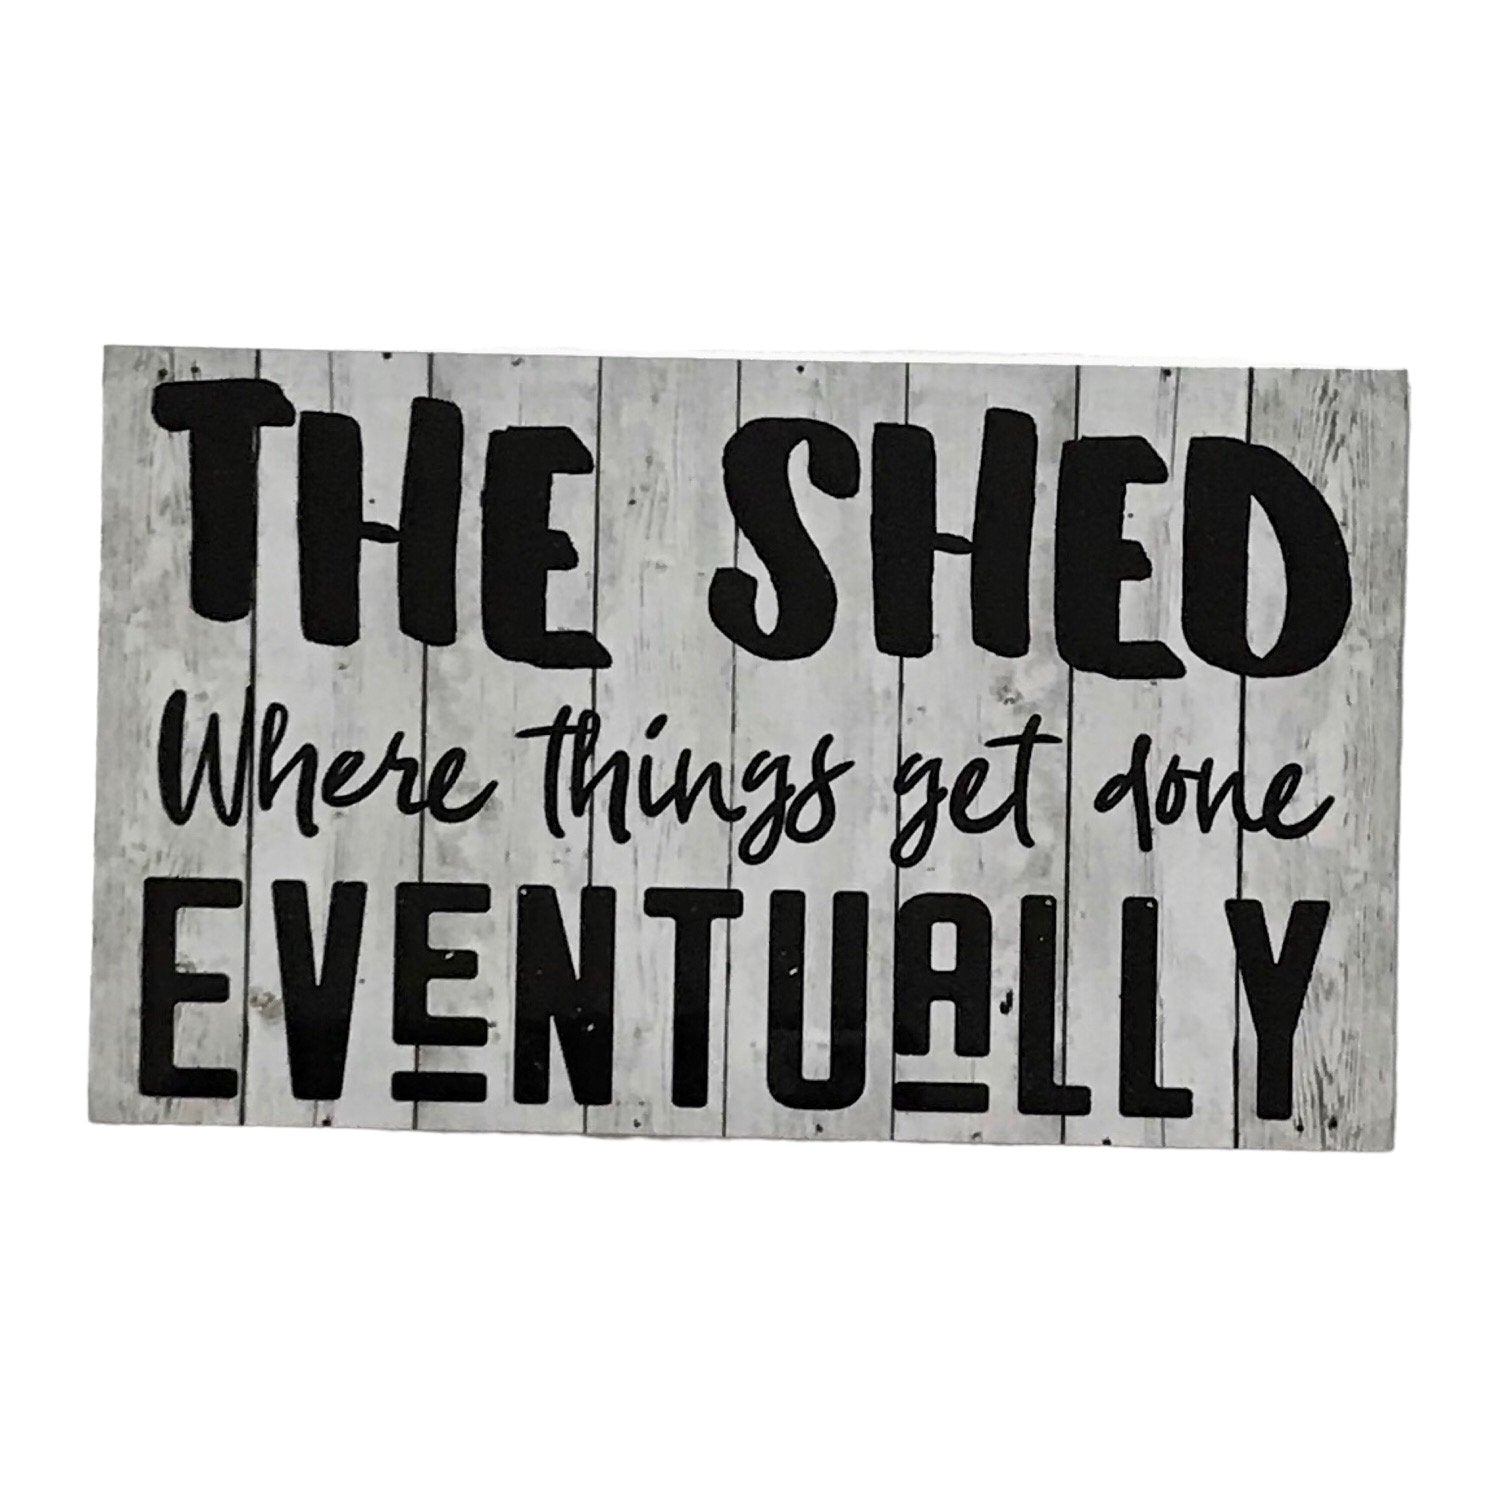 Shed Things Get Done Eventually White Wash Sign - The Renmy Store Homewares & Gifts 